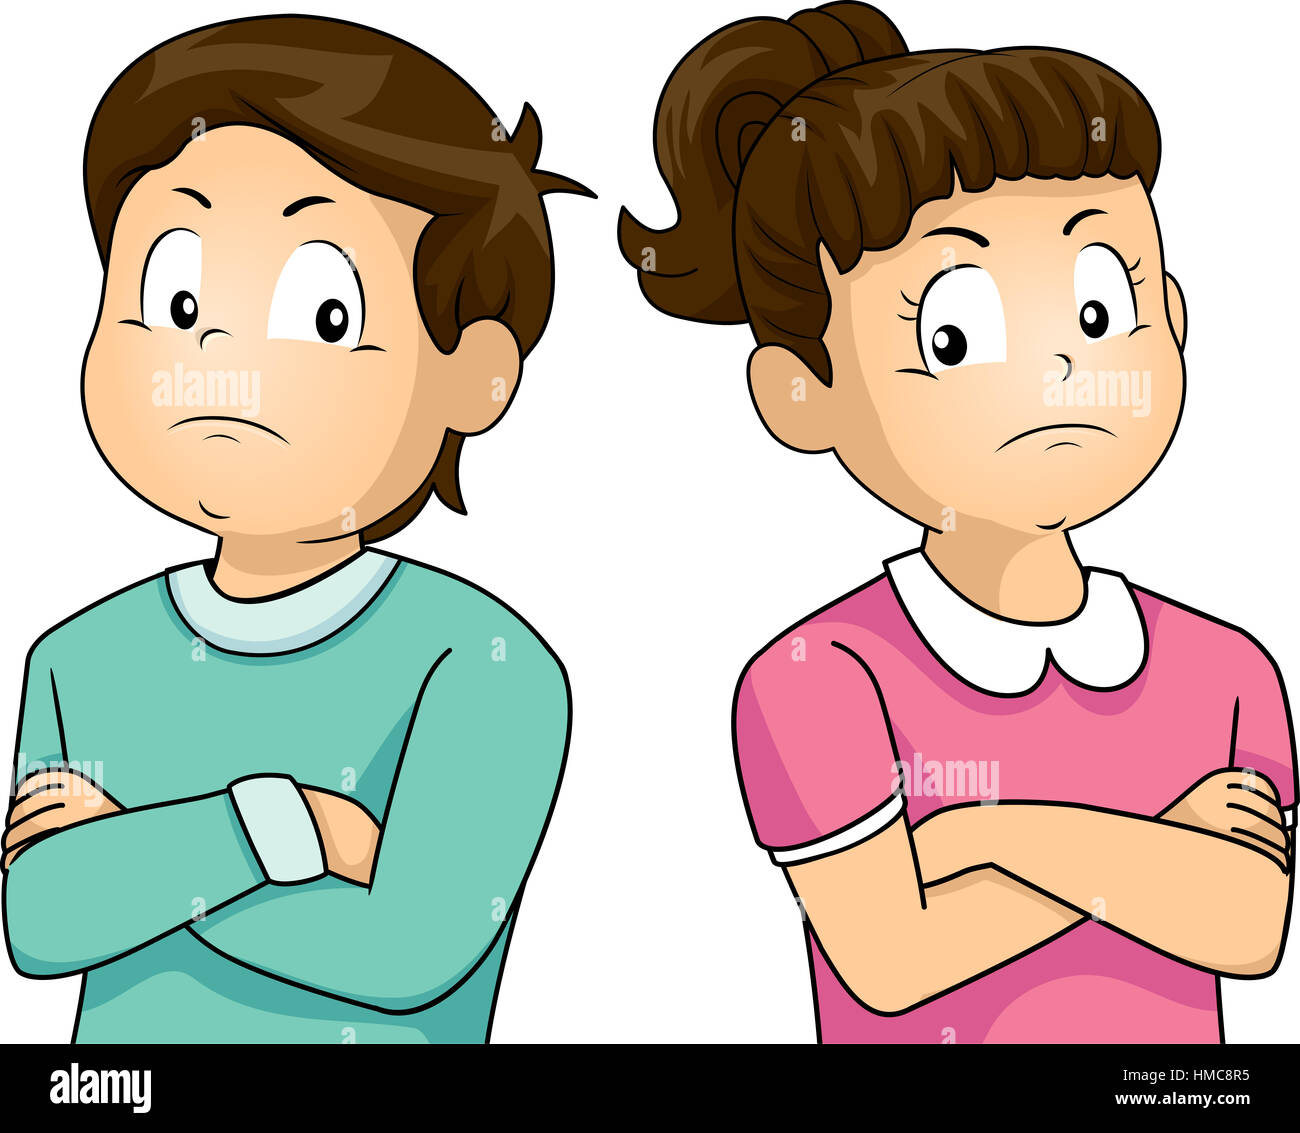 Illustration of a Little Girl and Boy Ignoring Each Other Stock Photo. 